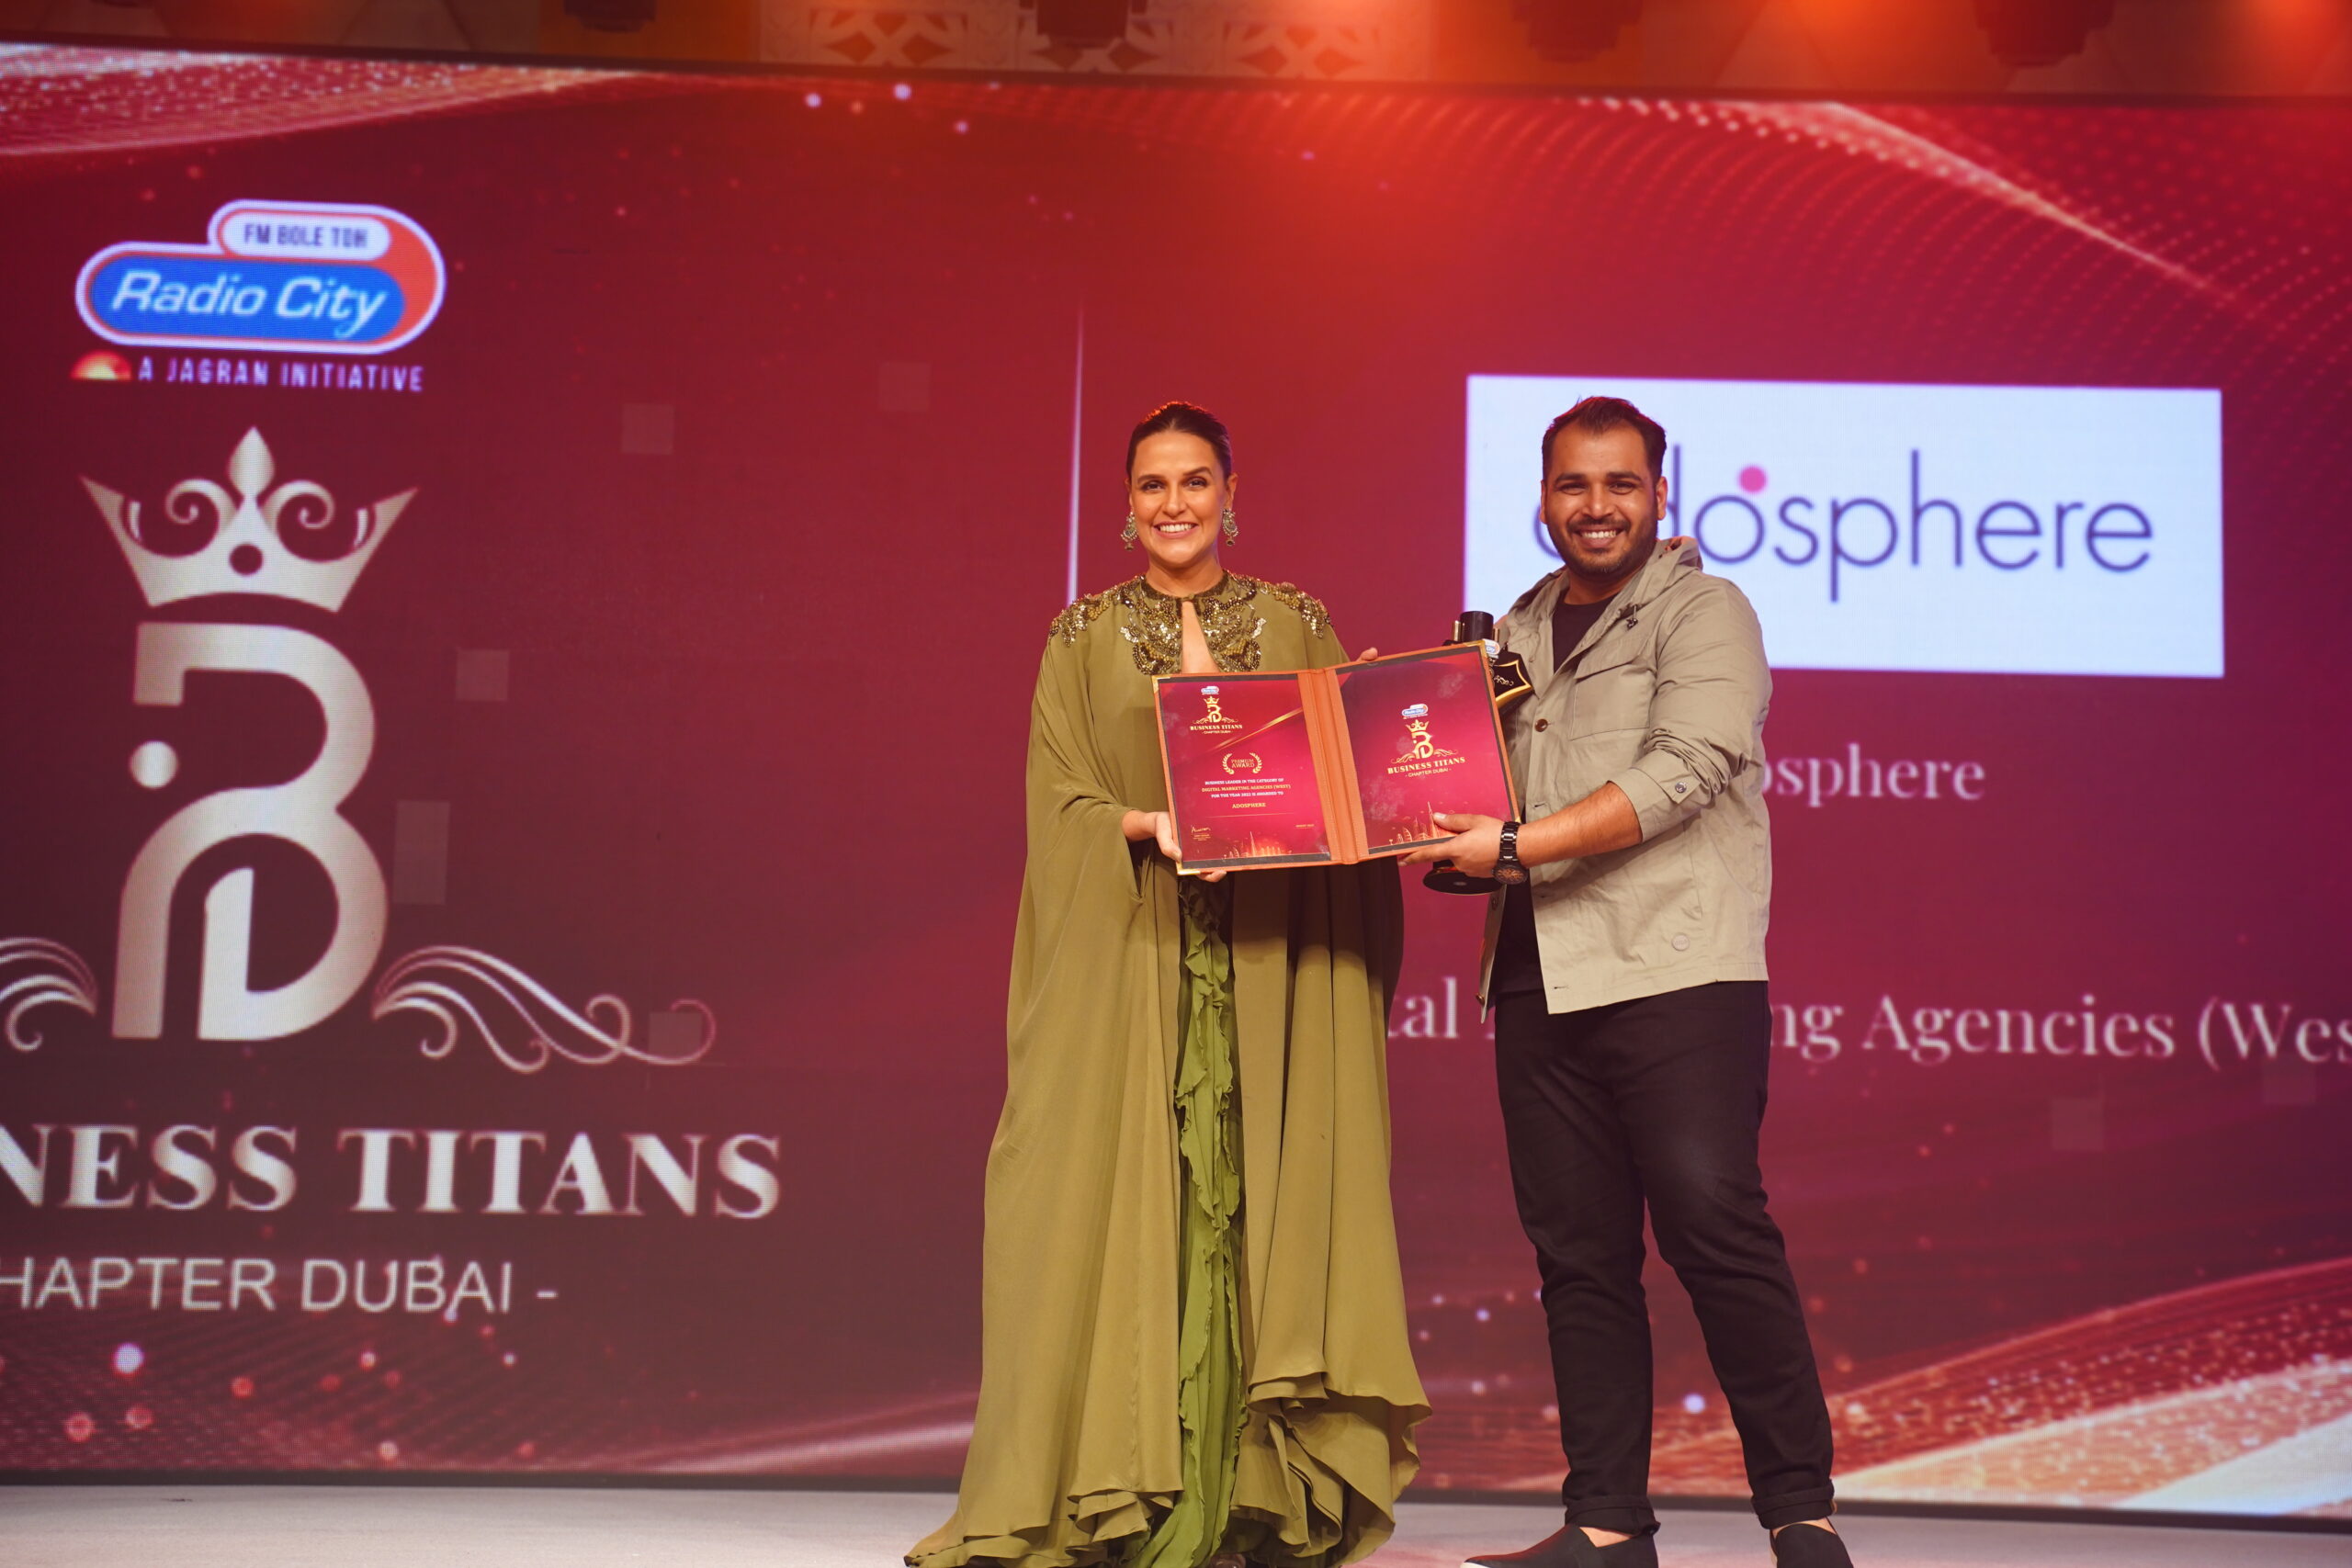 Neha Dhupia  for an appearance at a corporate event in Dubai